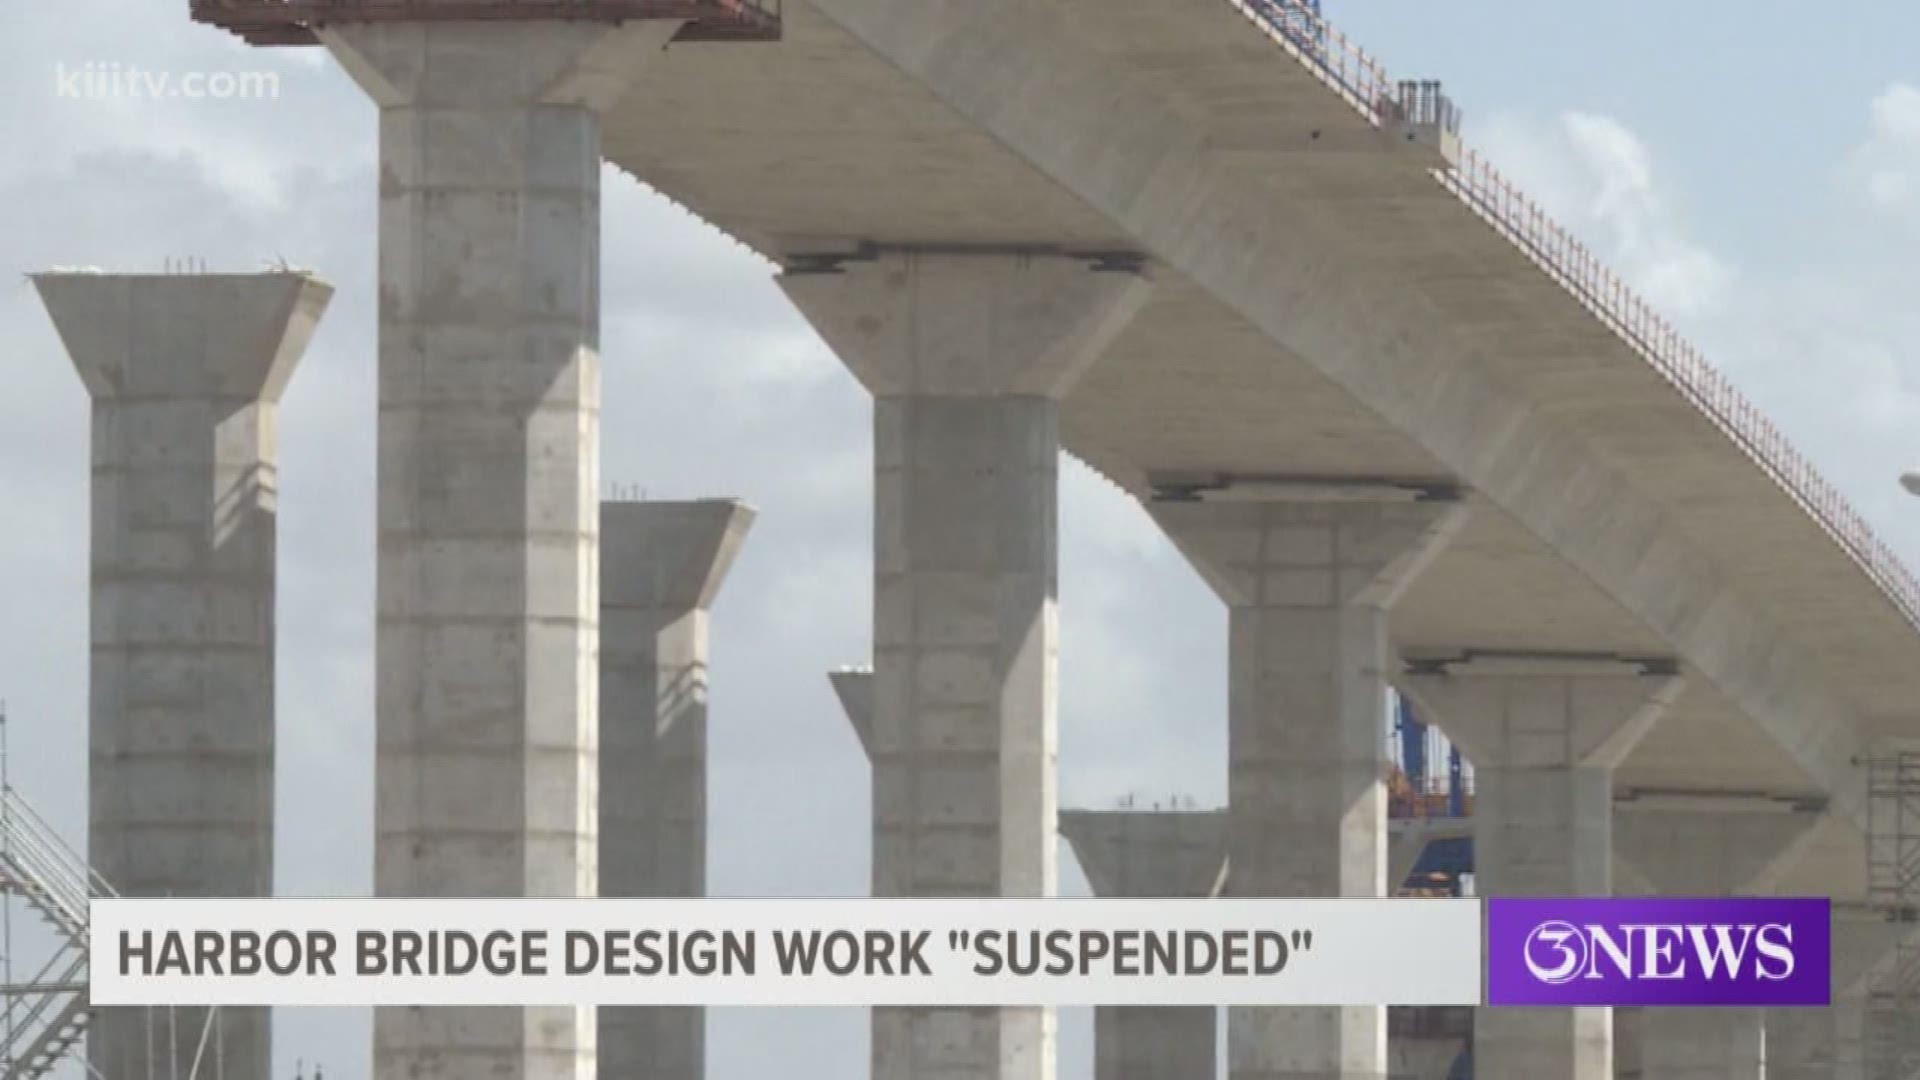 The Harbor Bridge project is said to be at least two years behind schedule.